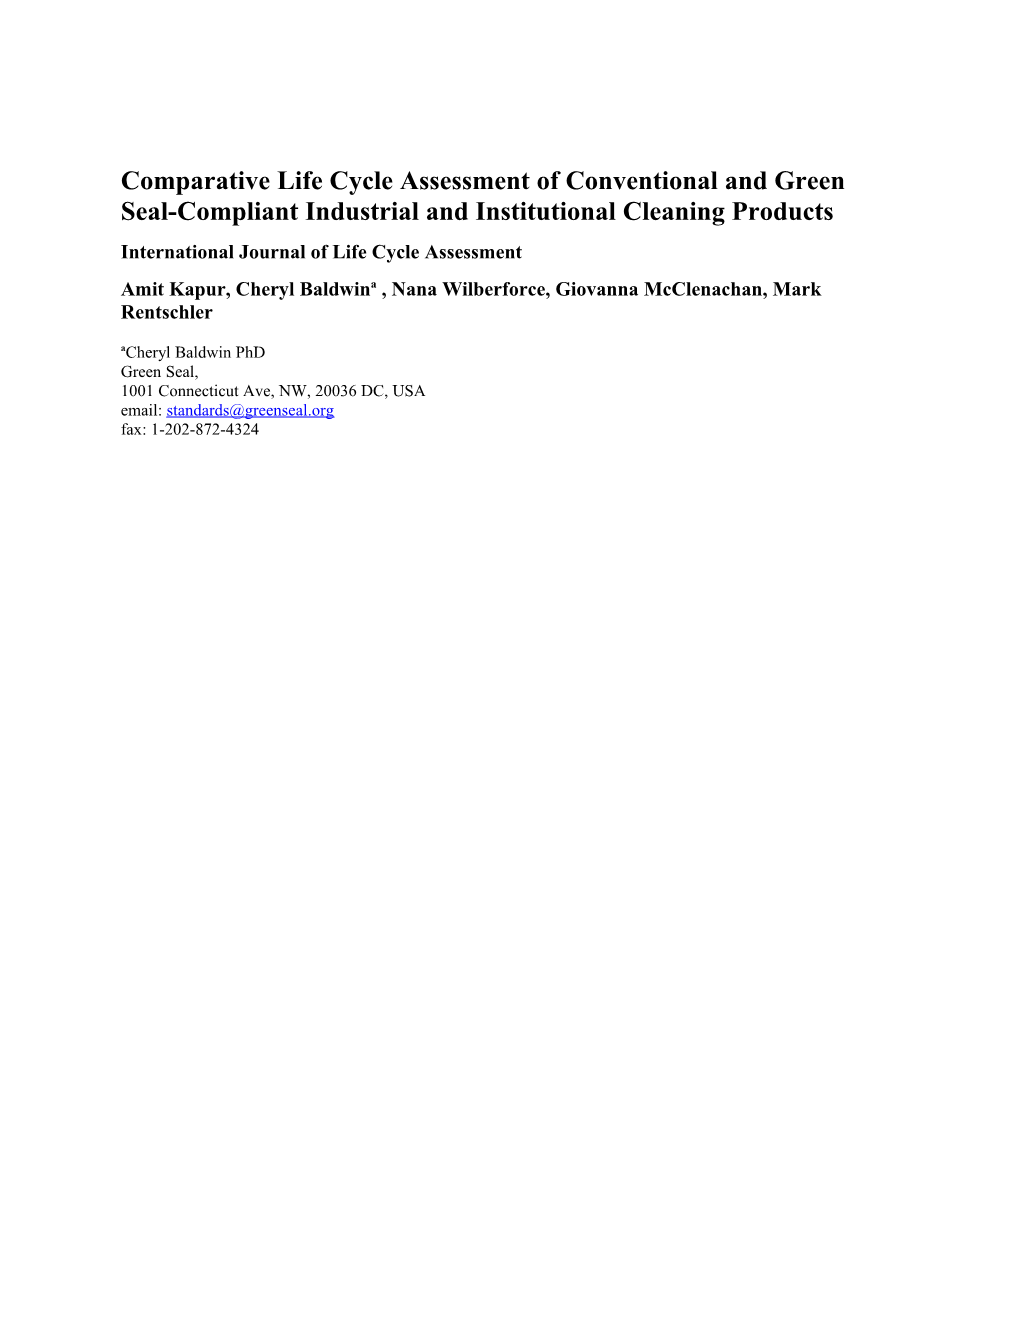 International Journal of Life Cycle Assessment